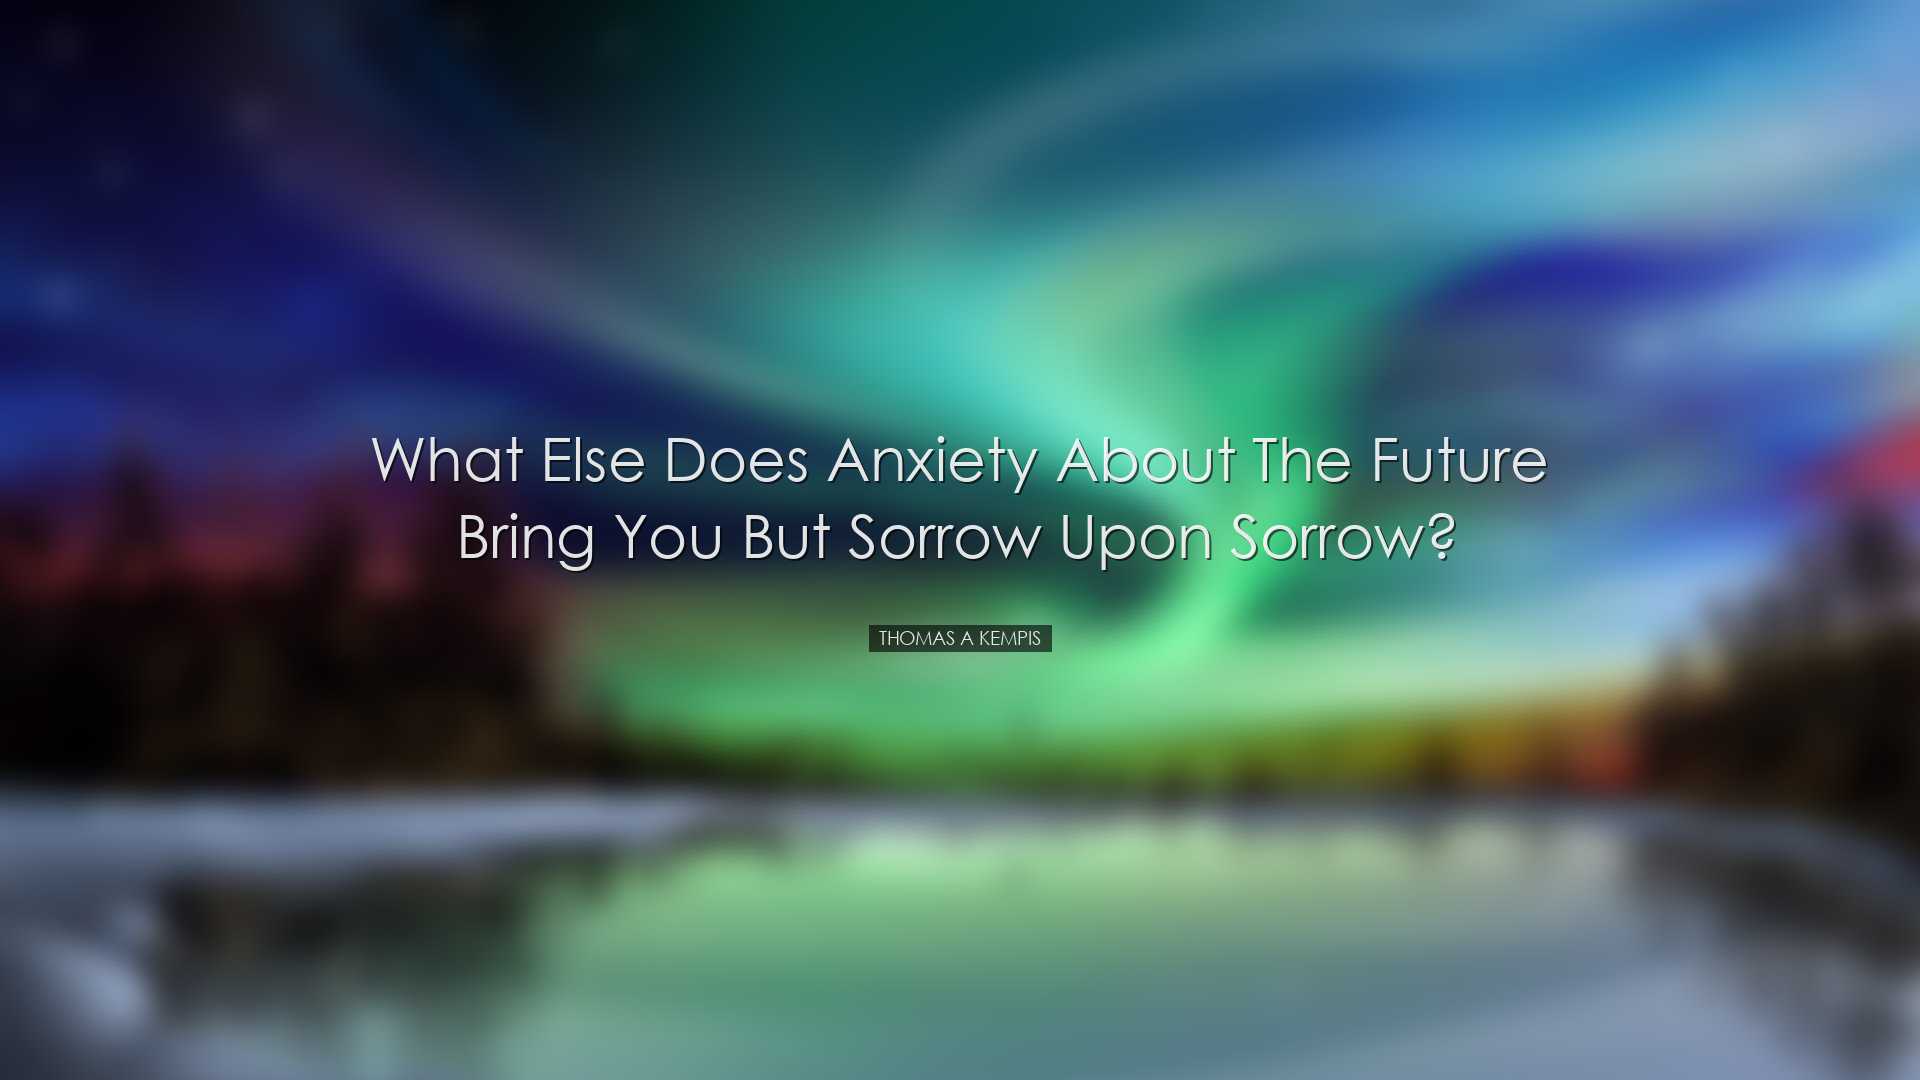 What else does anxiety about the future bring you but sorrow upon